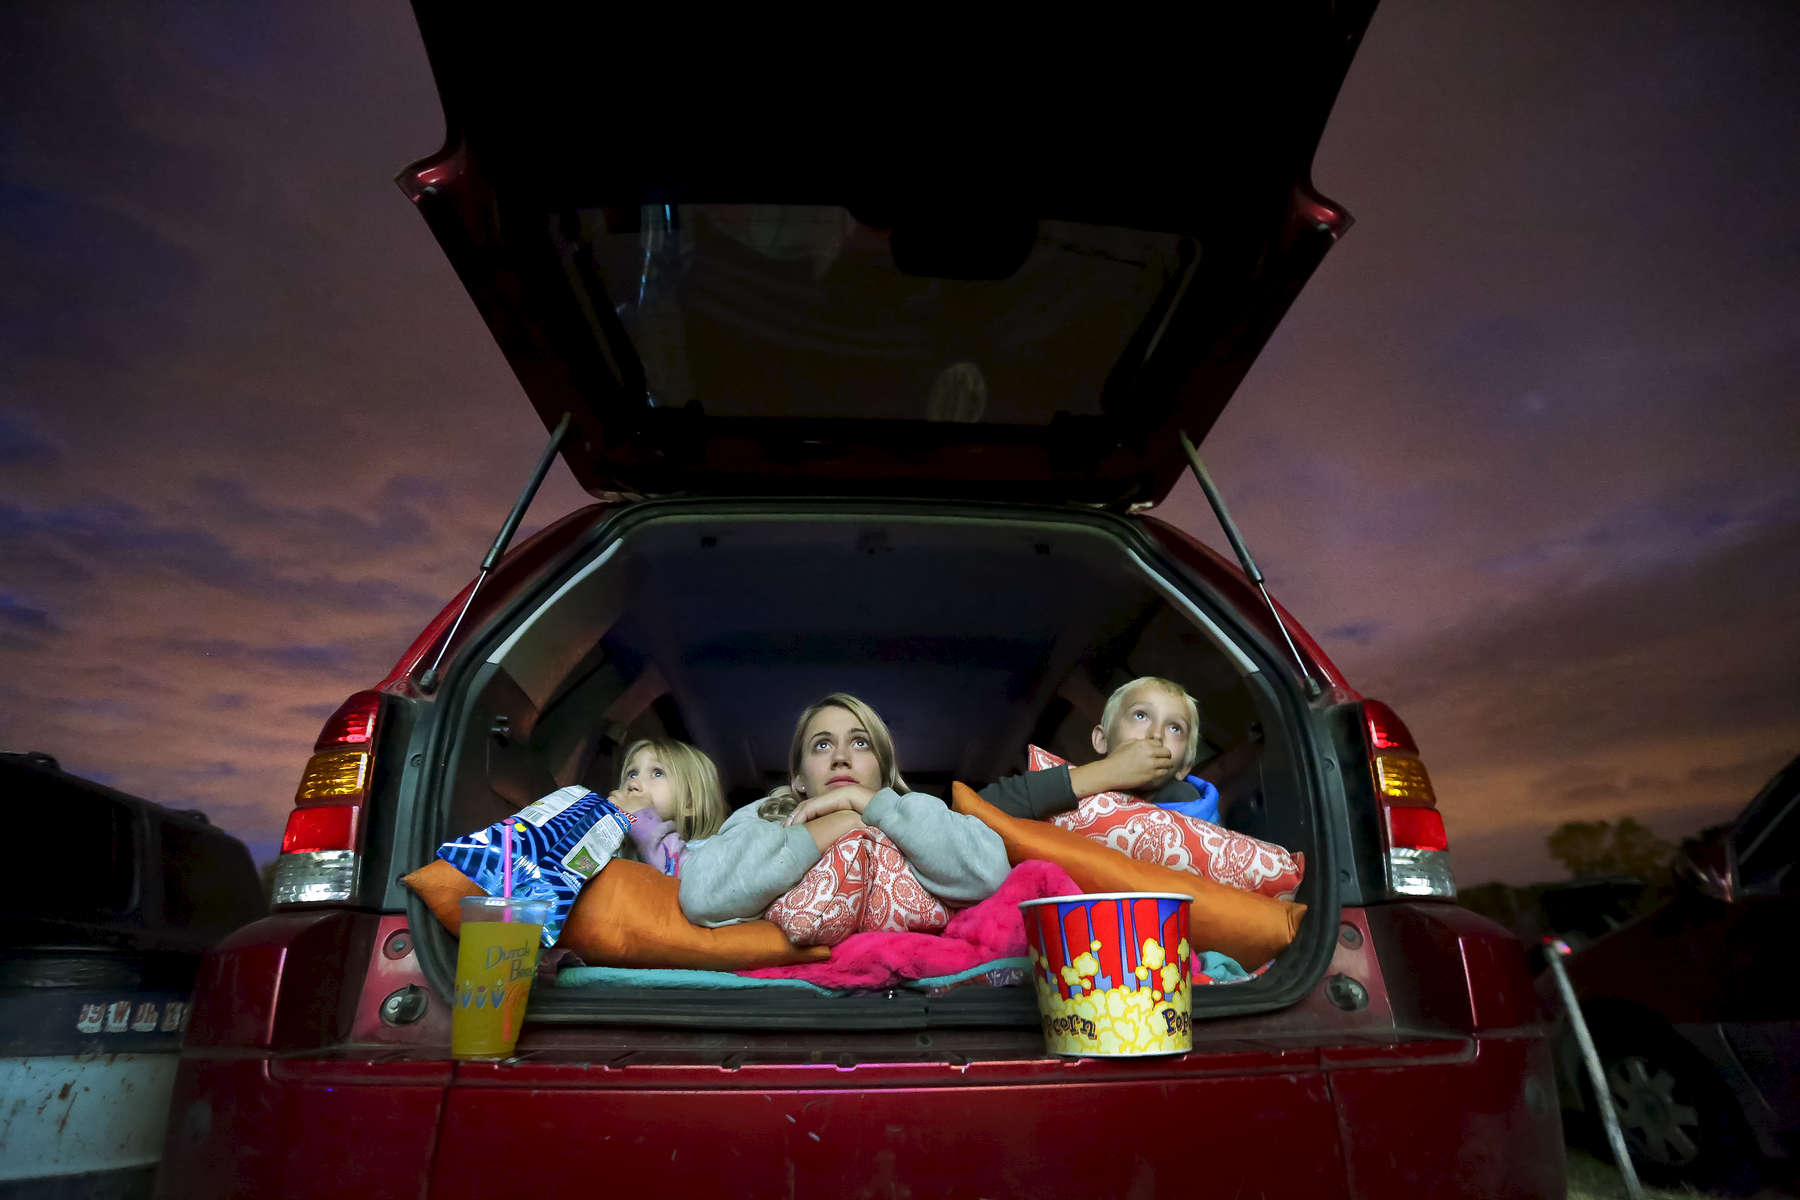 The Haight family from Grand Ronde (left to right) Hemi, 4, her mother Kiri, and Tommy, 8, watch the movie. Moviegoers enjoy a night at the theater at the 99W Drive-In Theatre in Newburg, June 18, 2016. The theatre opened in August 1953 and continues operating under the third-generation owner, Brian Francis. Kristyna Wentz-Graff/Staff